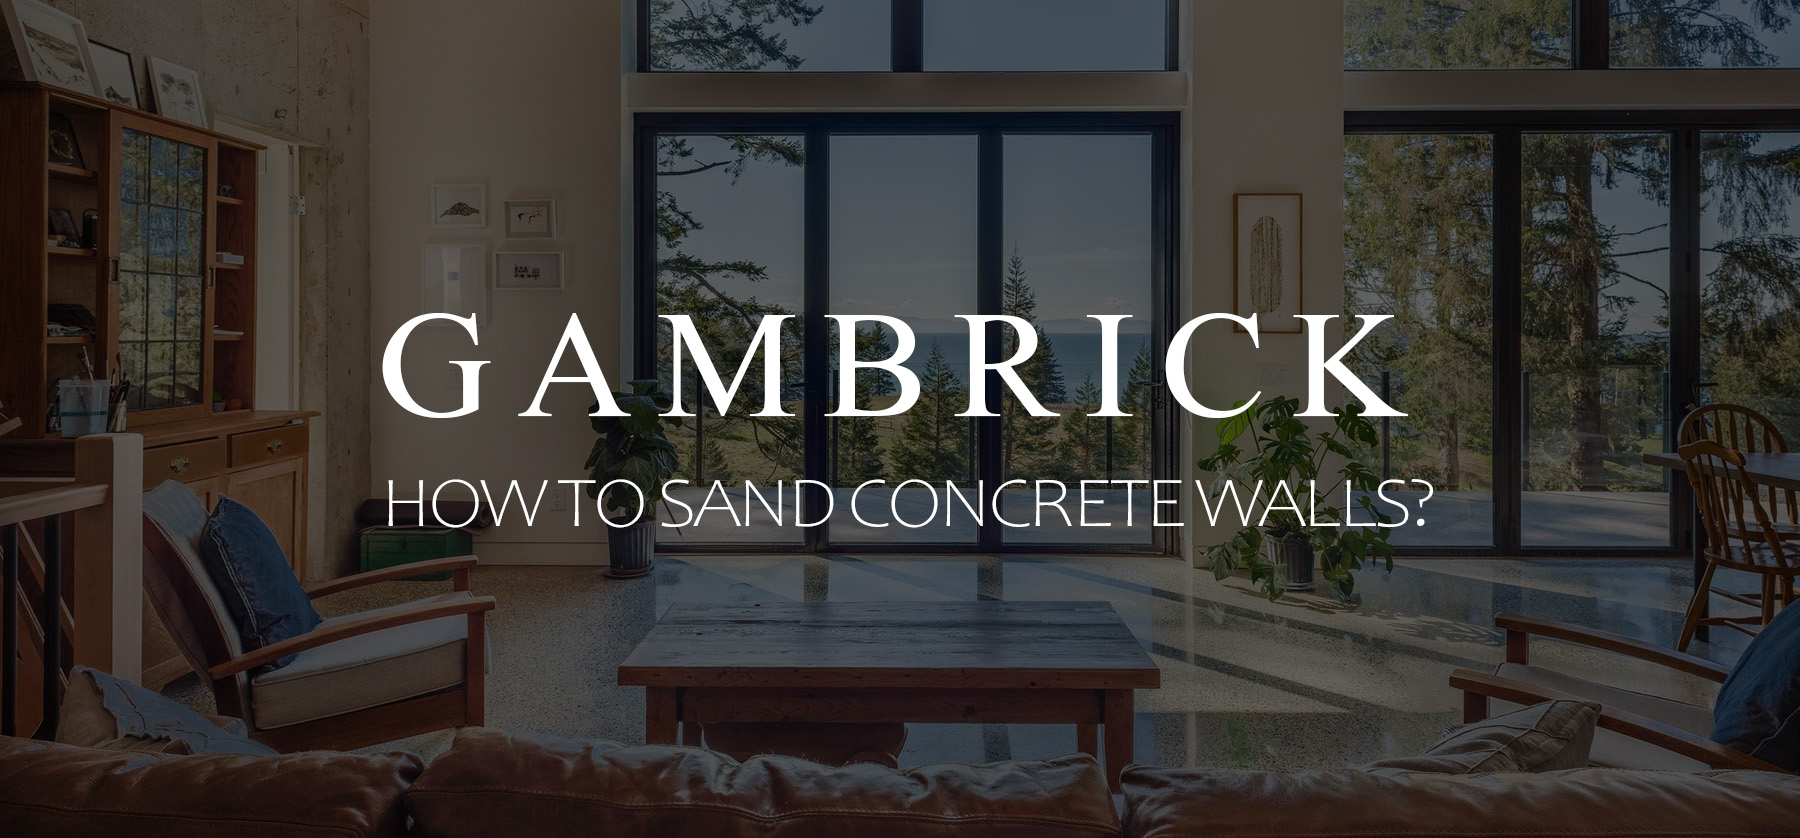 how to sand concrete walls banner